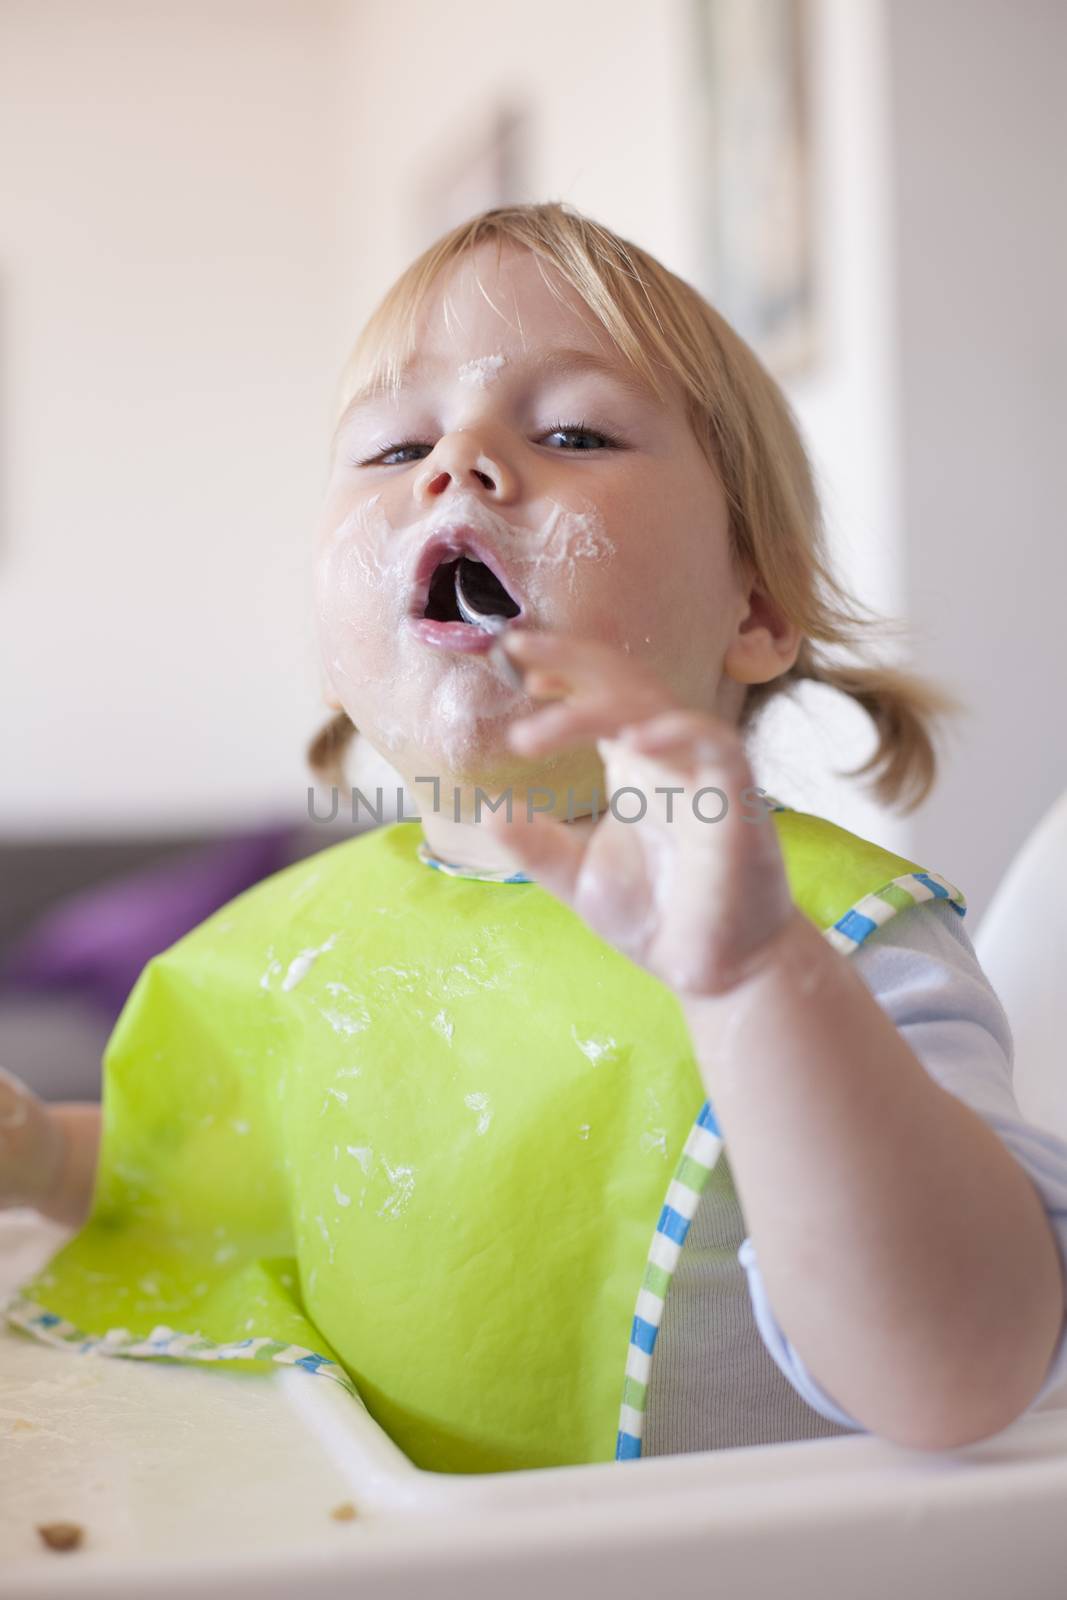 baby eating spoon in mouth by quintanilla